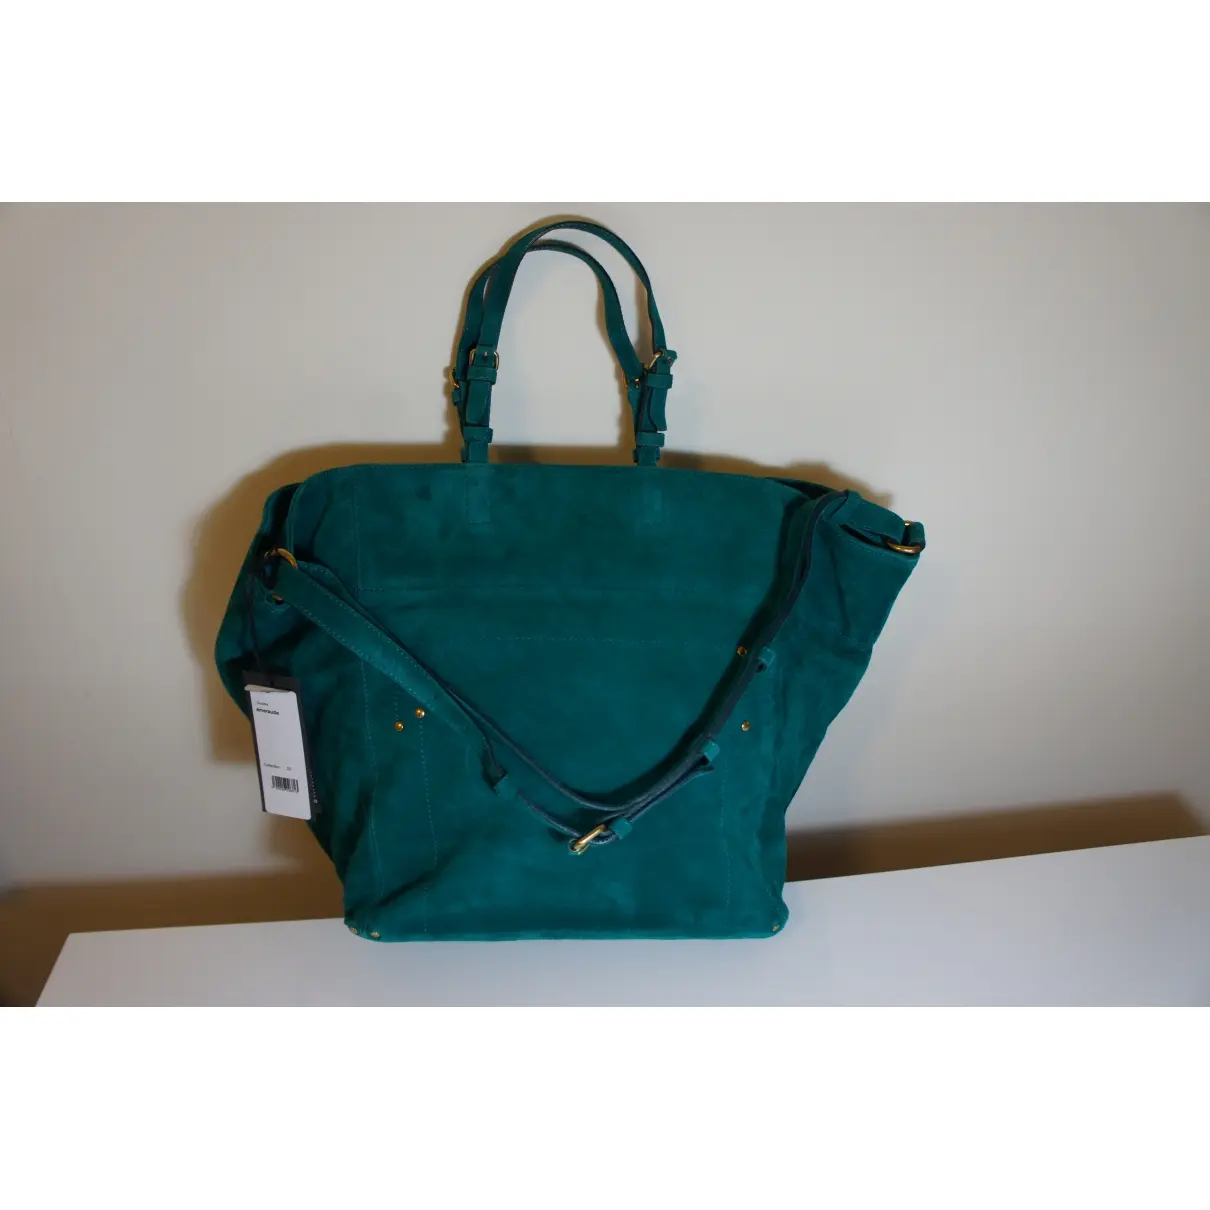 Jerome Dreyfuss Jacques tote for sale